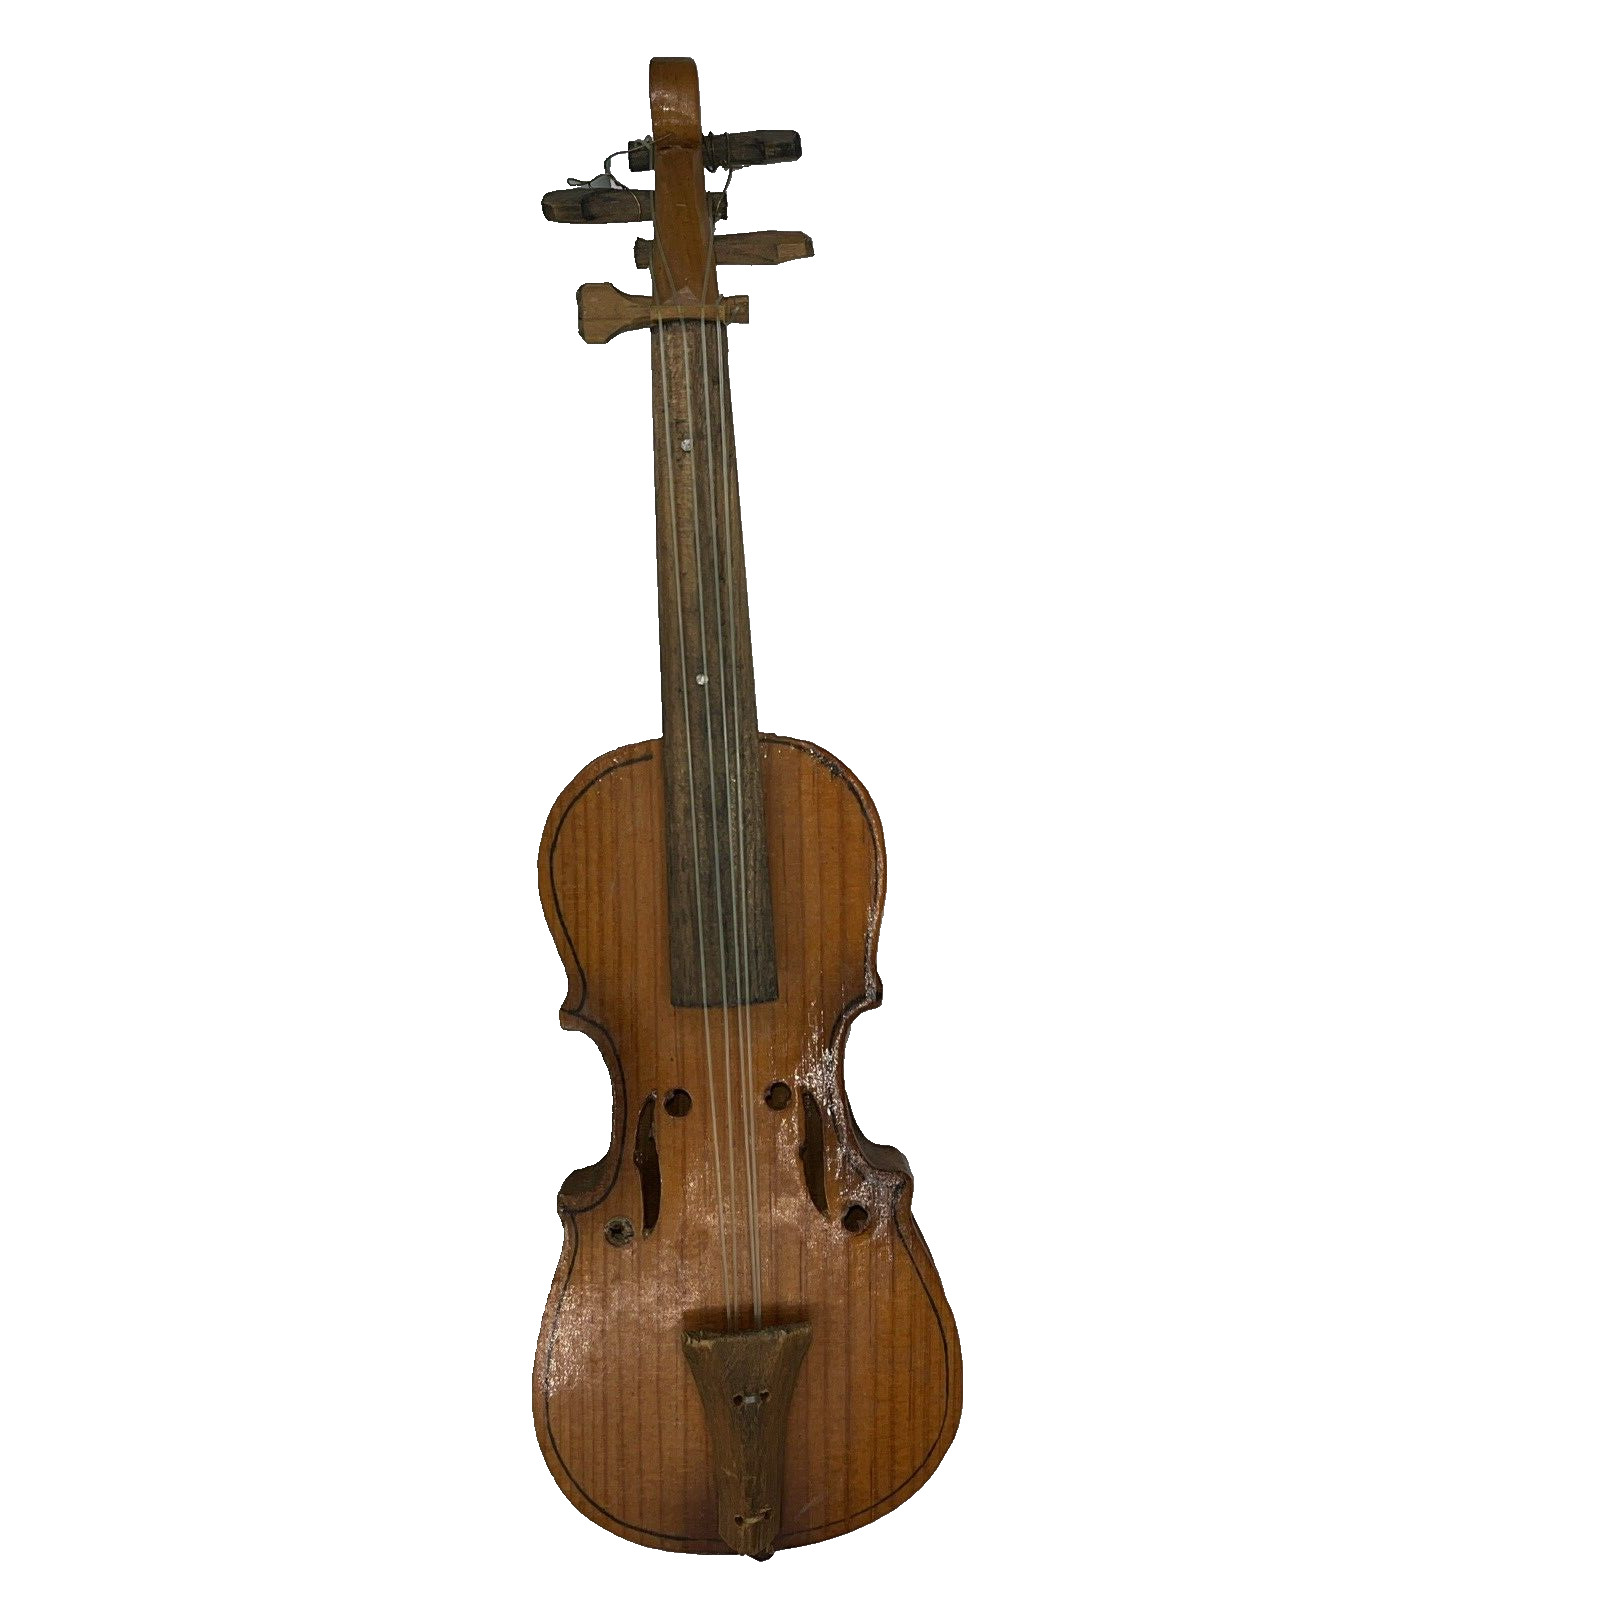 Vintage Wood Hand Crafted Small Replica Cello, Violin, Bass Stringed Instrument